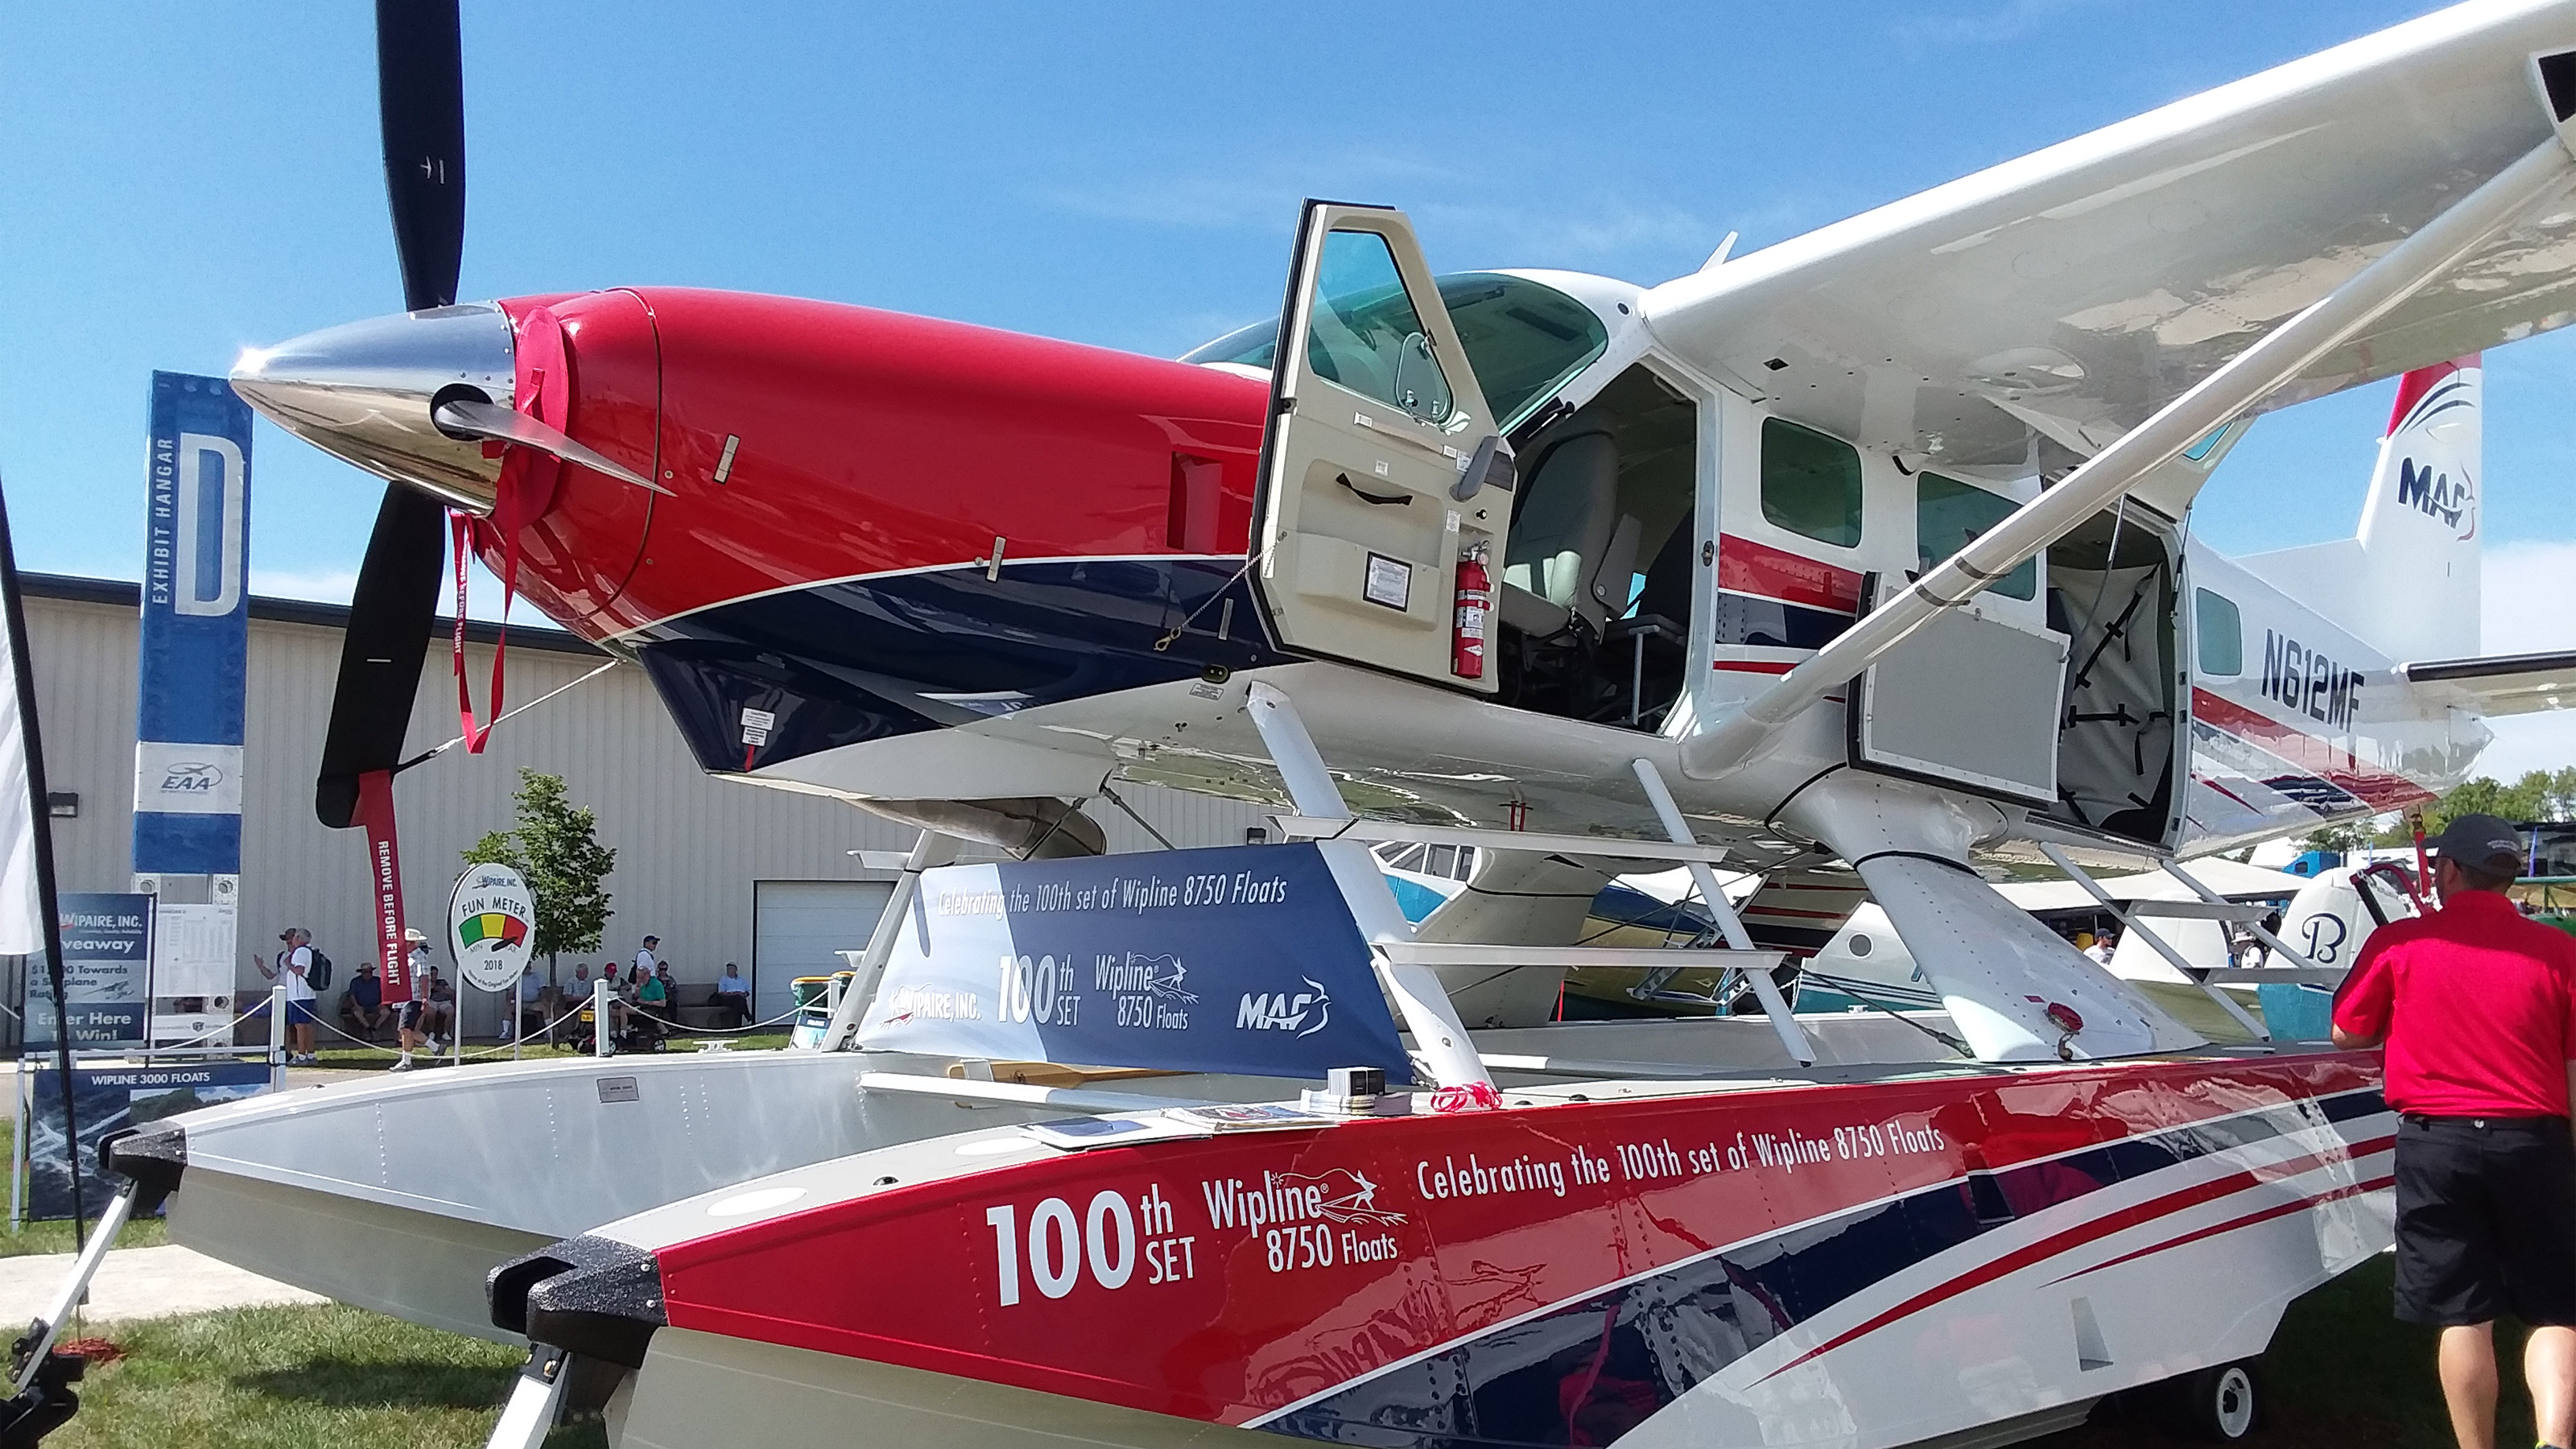 A brand-new Cessna Caravan with Wipline 8750 amphibious floats will soon head to Indonesia to be put in service with Mission Aviation Fellowship. Photo by Alyssa Cobb.